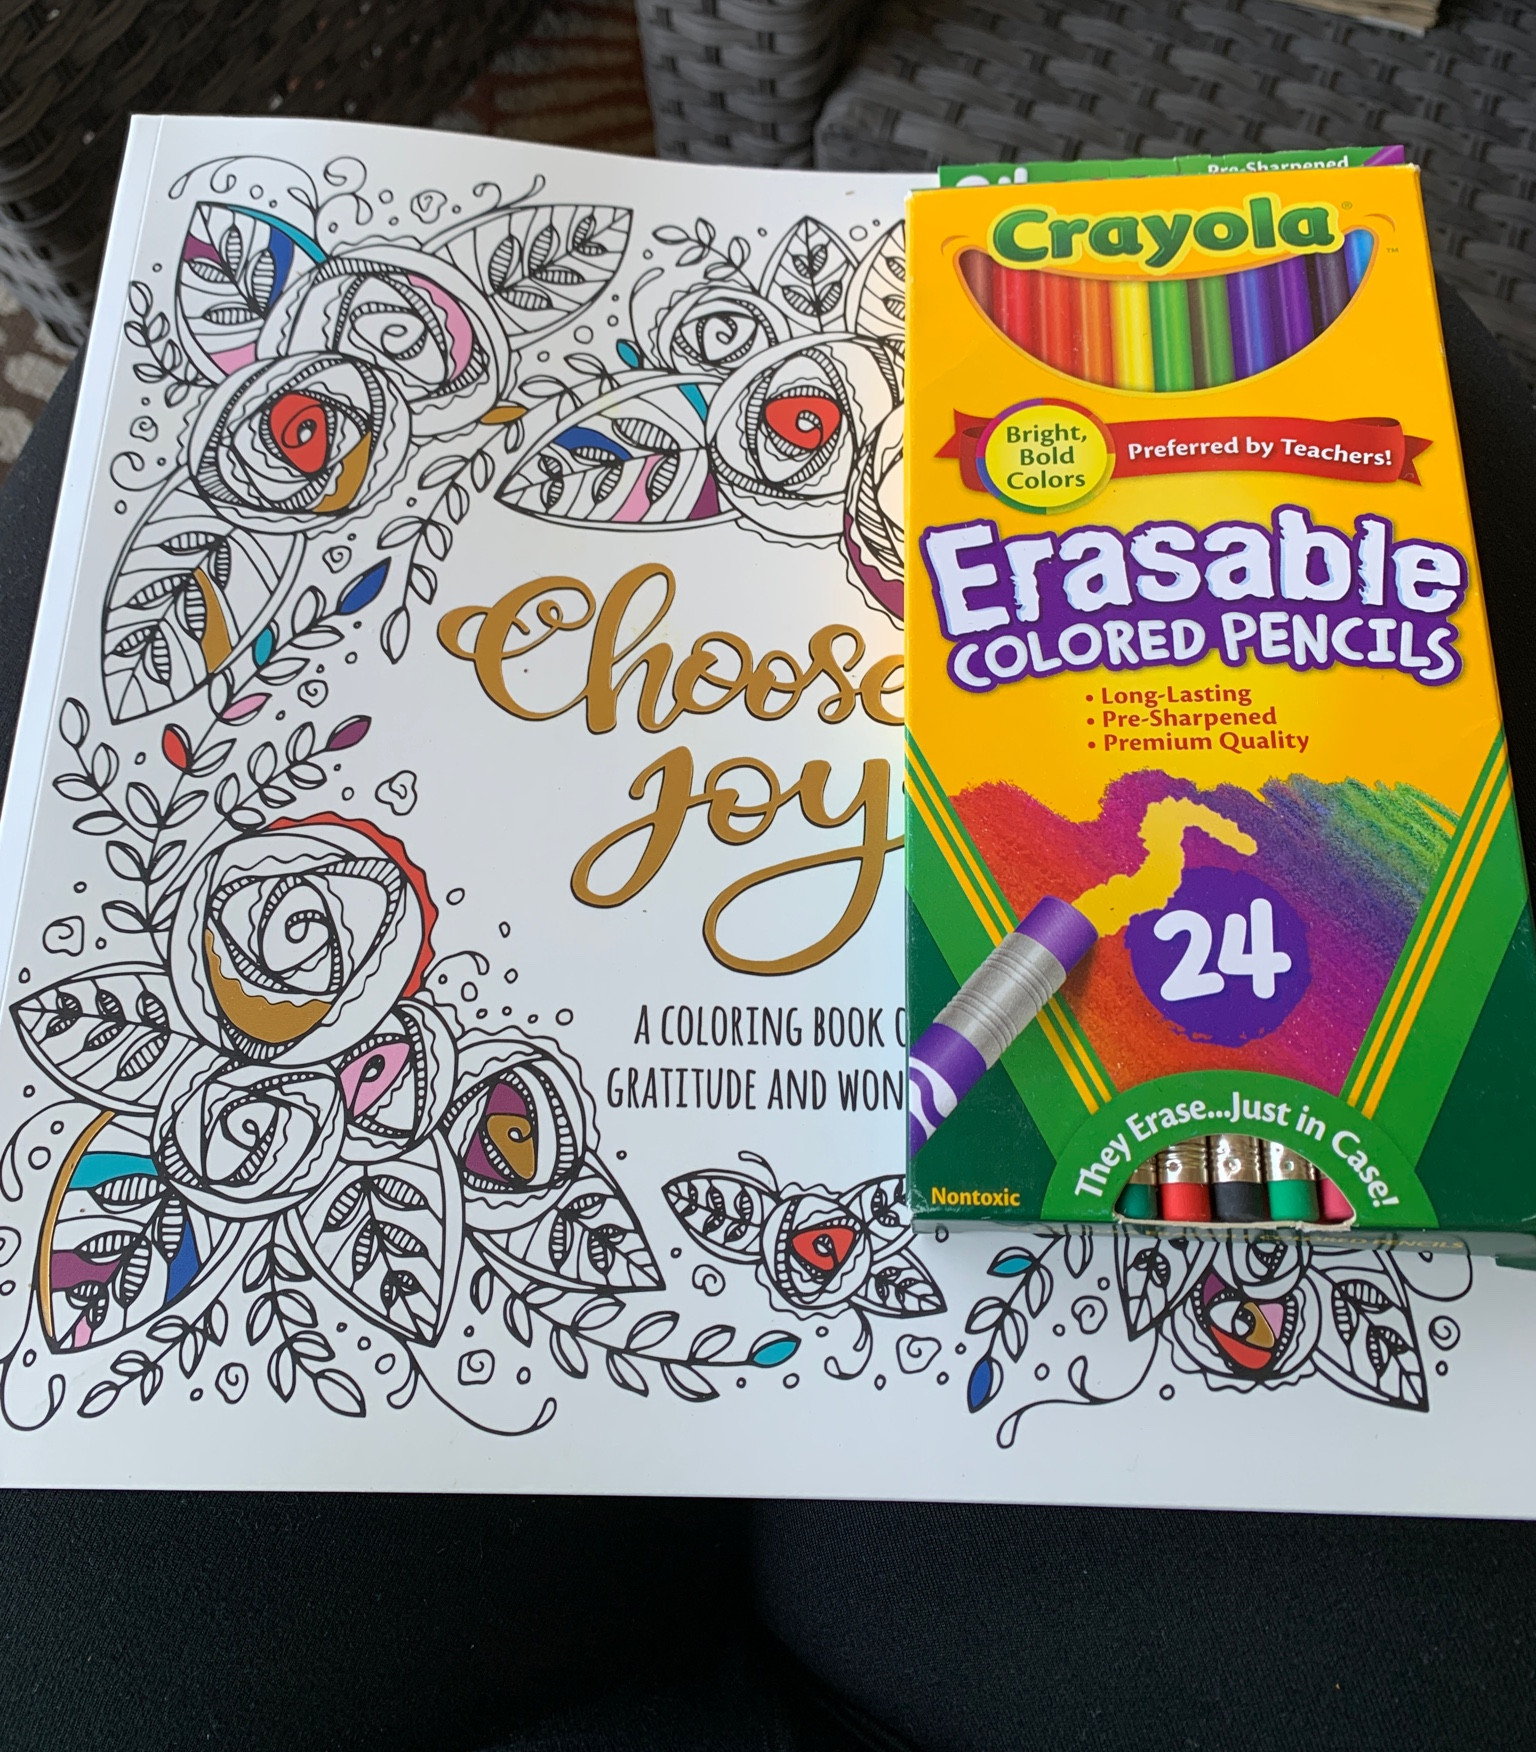  Colored Pencils with Adult Coloring book- Colored Pencils for Adult  Coloring 50 Count  Coloring Books with Coloring Pencils. Premium Artist Coloring  Pencils with coloring books for adults relaxation. 